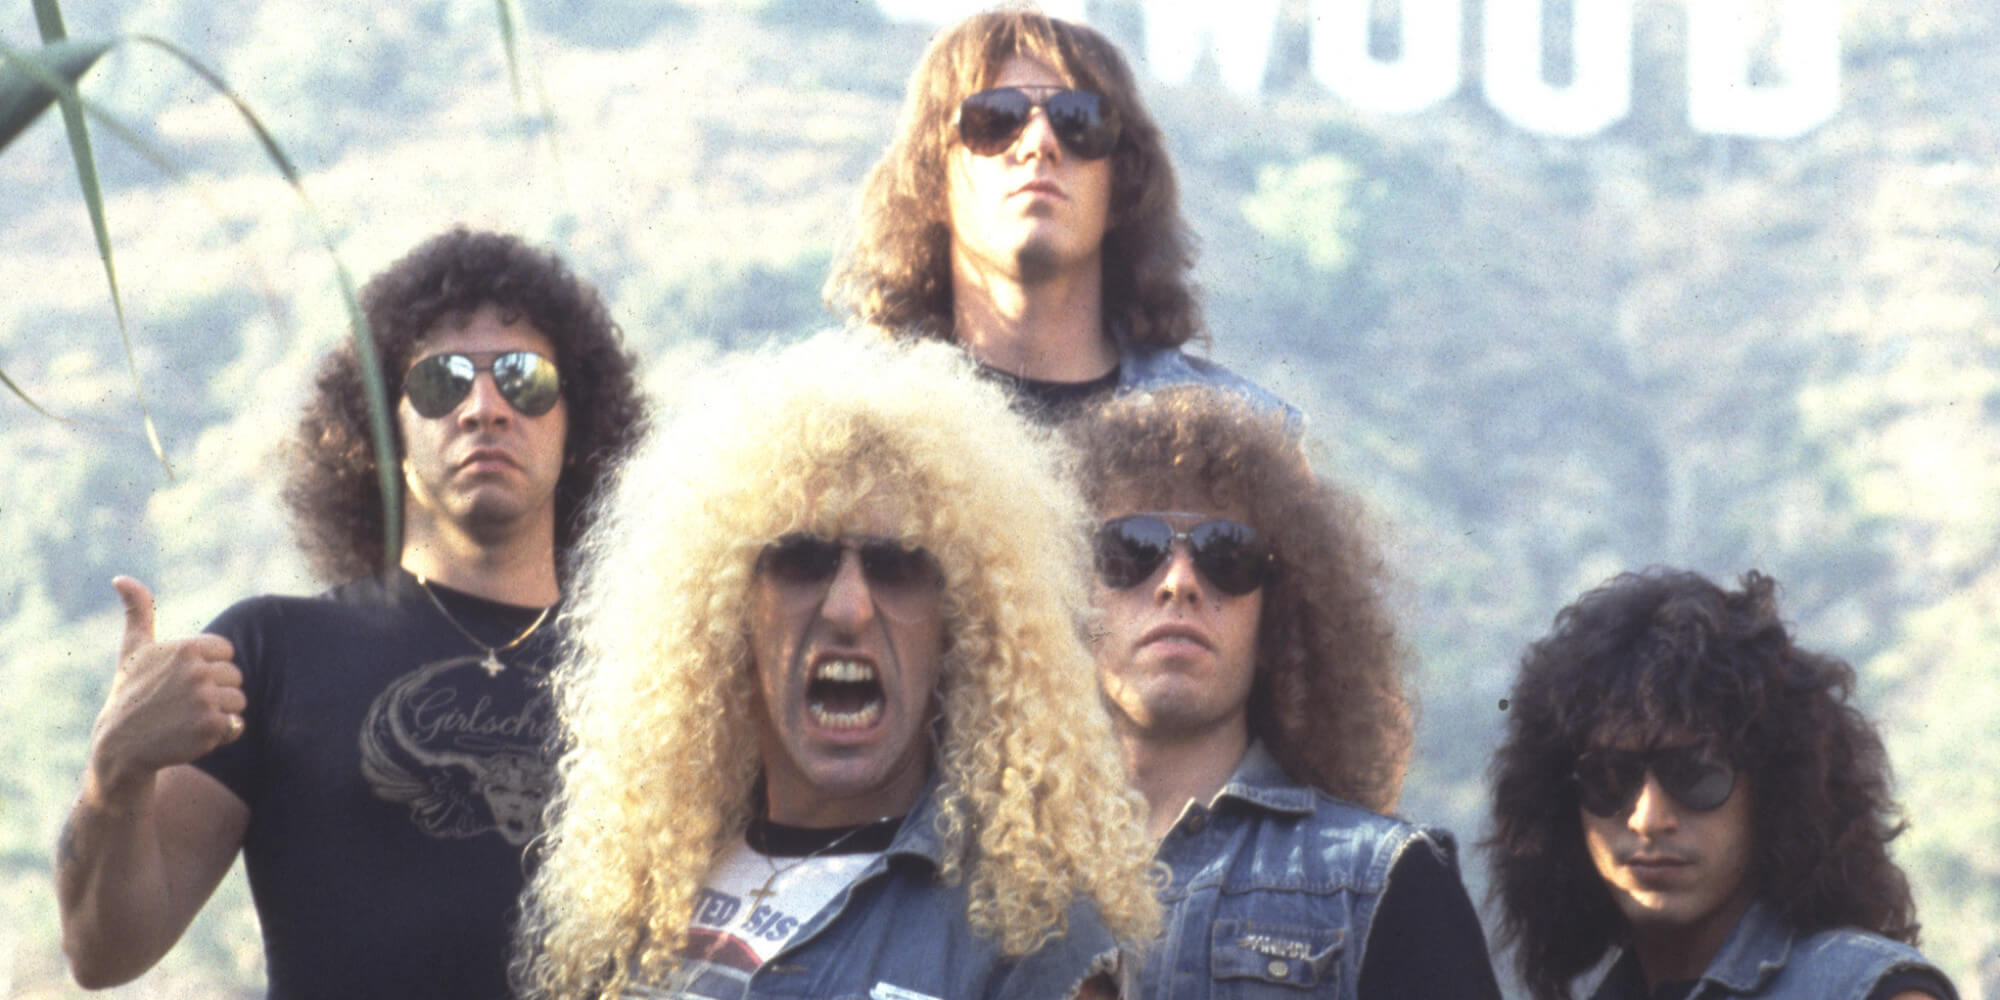 Great Unknown Songs #1 – Twisted Sister Bad Boys (Of Rock & Roll)